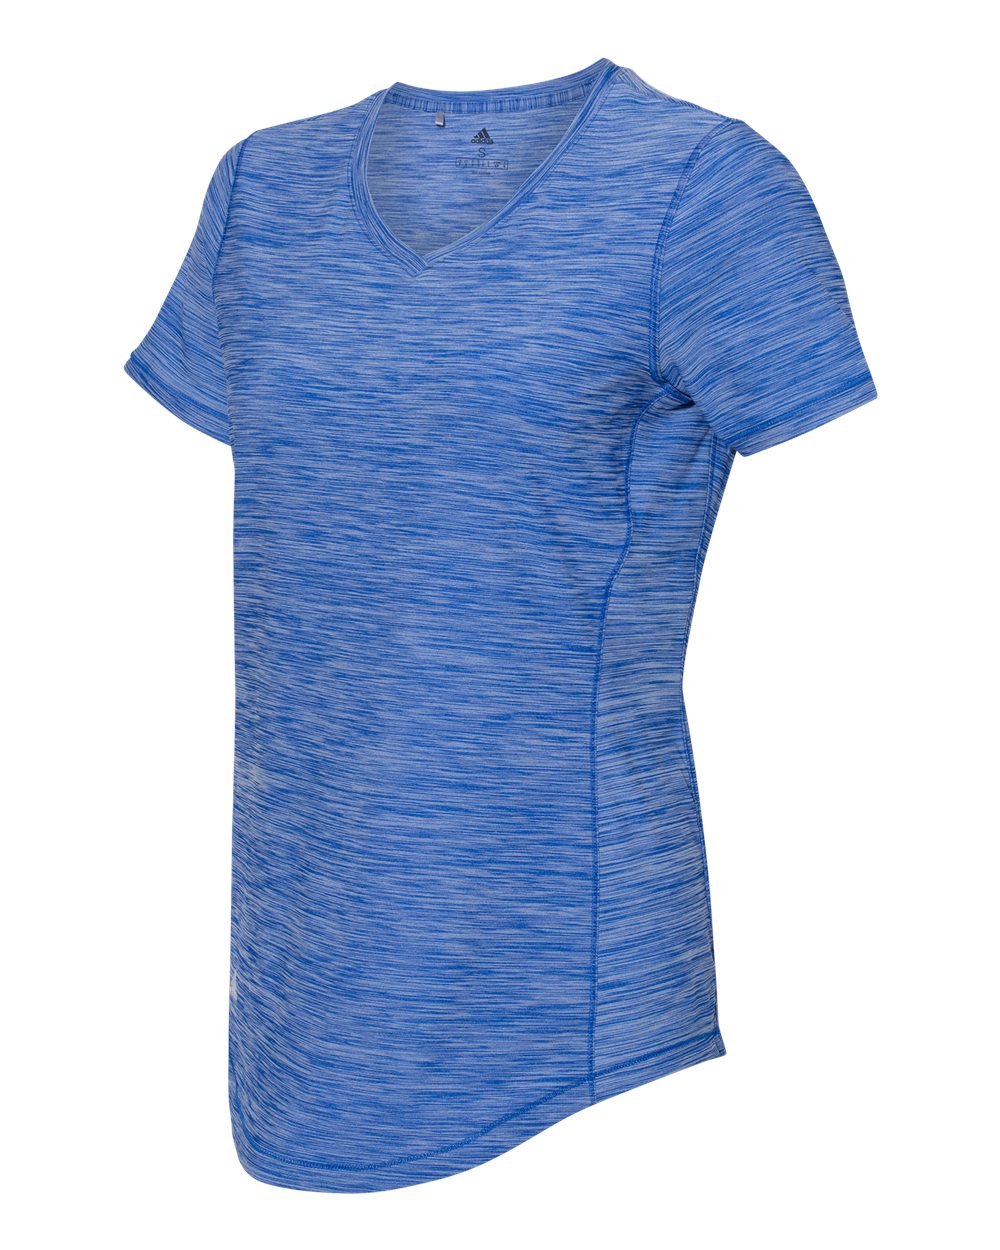 click to view Collegiate Royal Heather